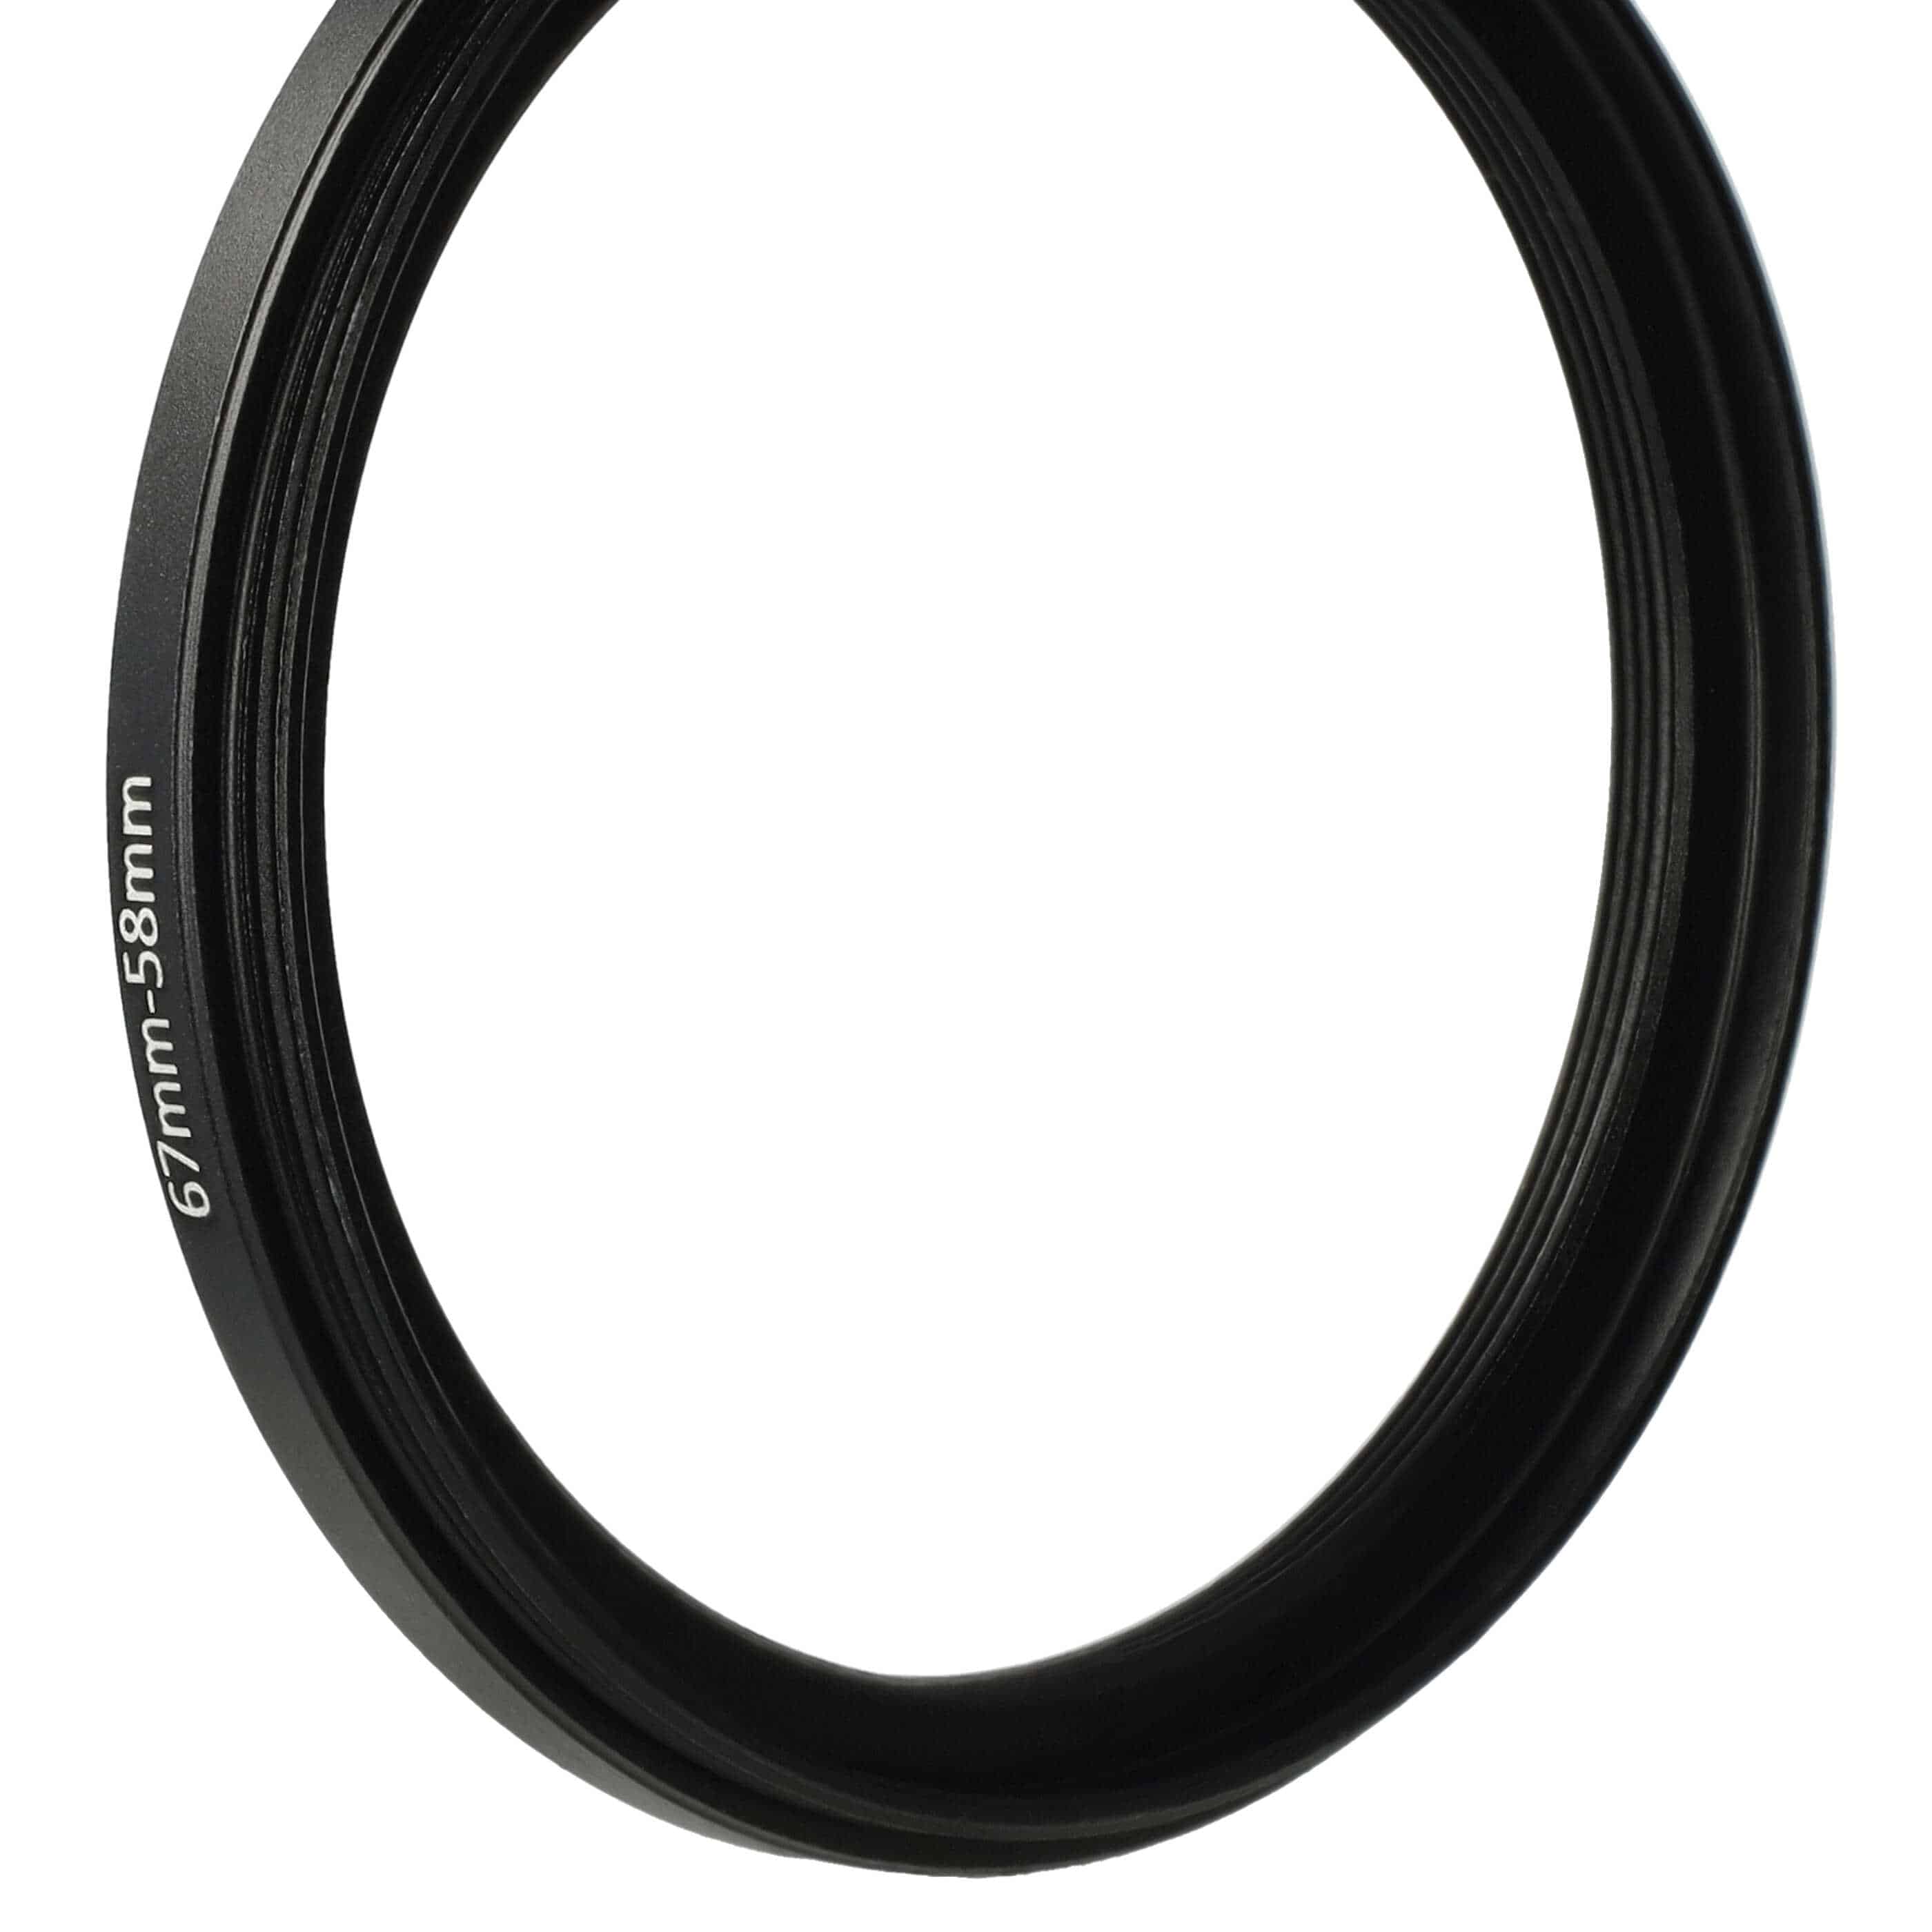 Step-Down Ring Adapter from 67 mm to 58 mm for various Camera Lenses